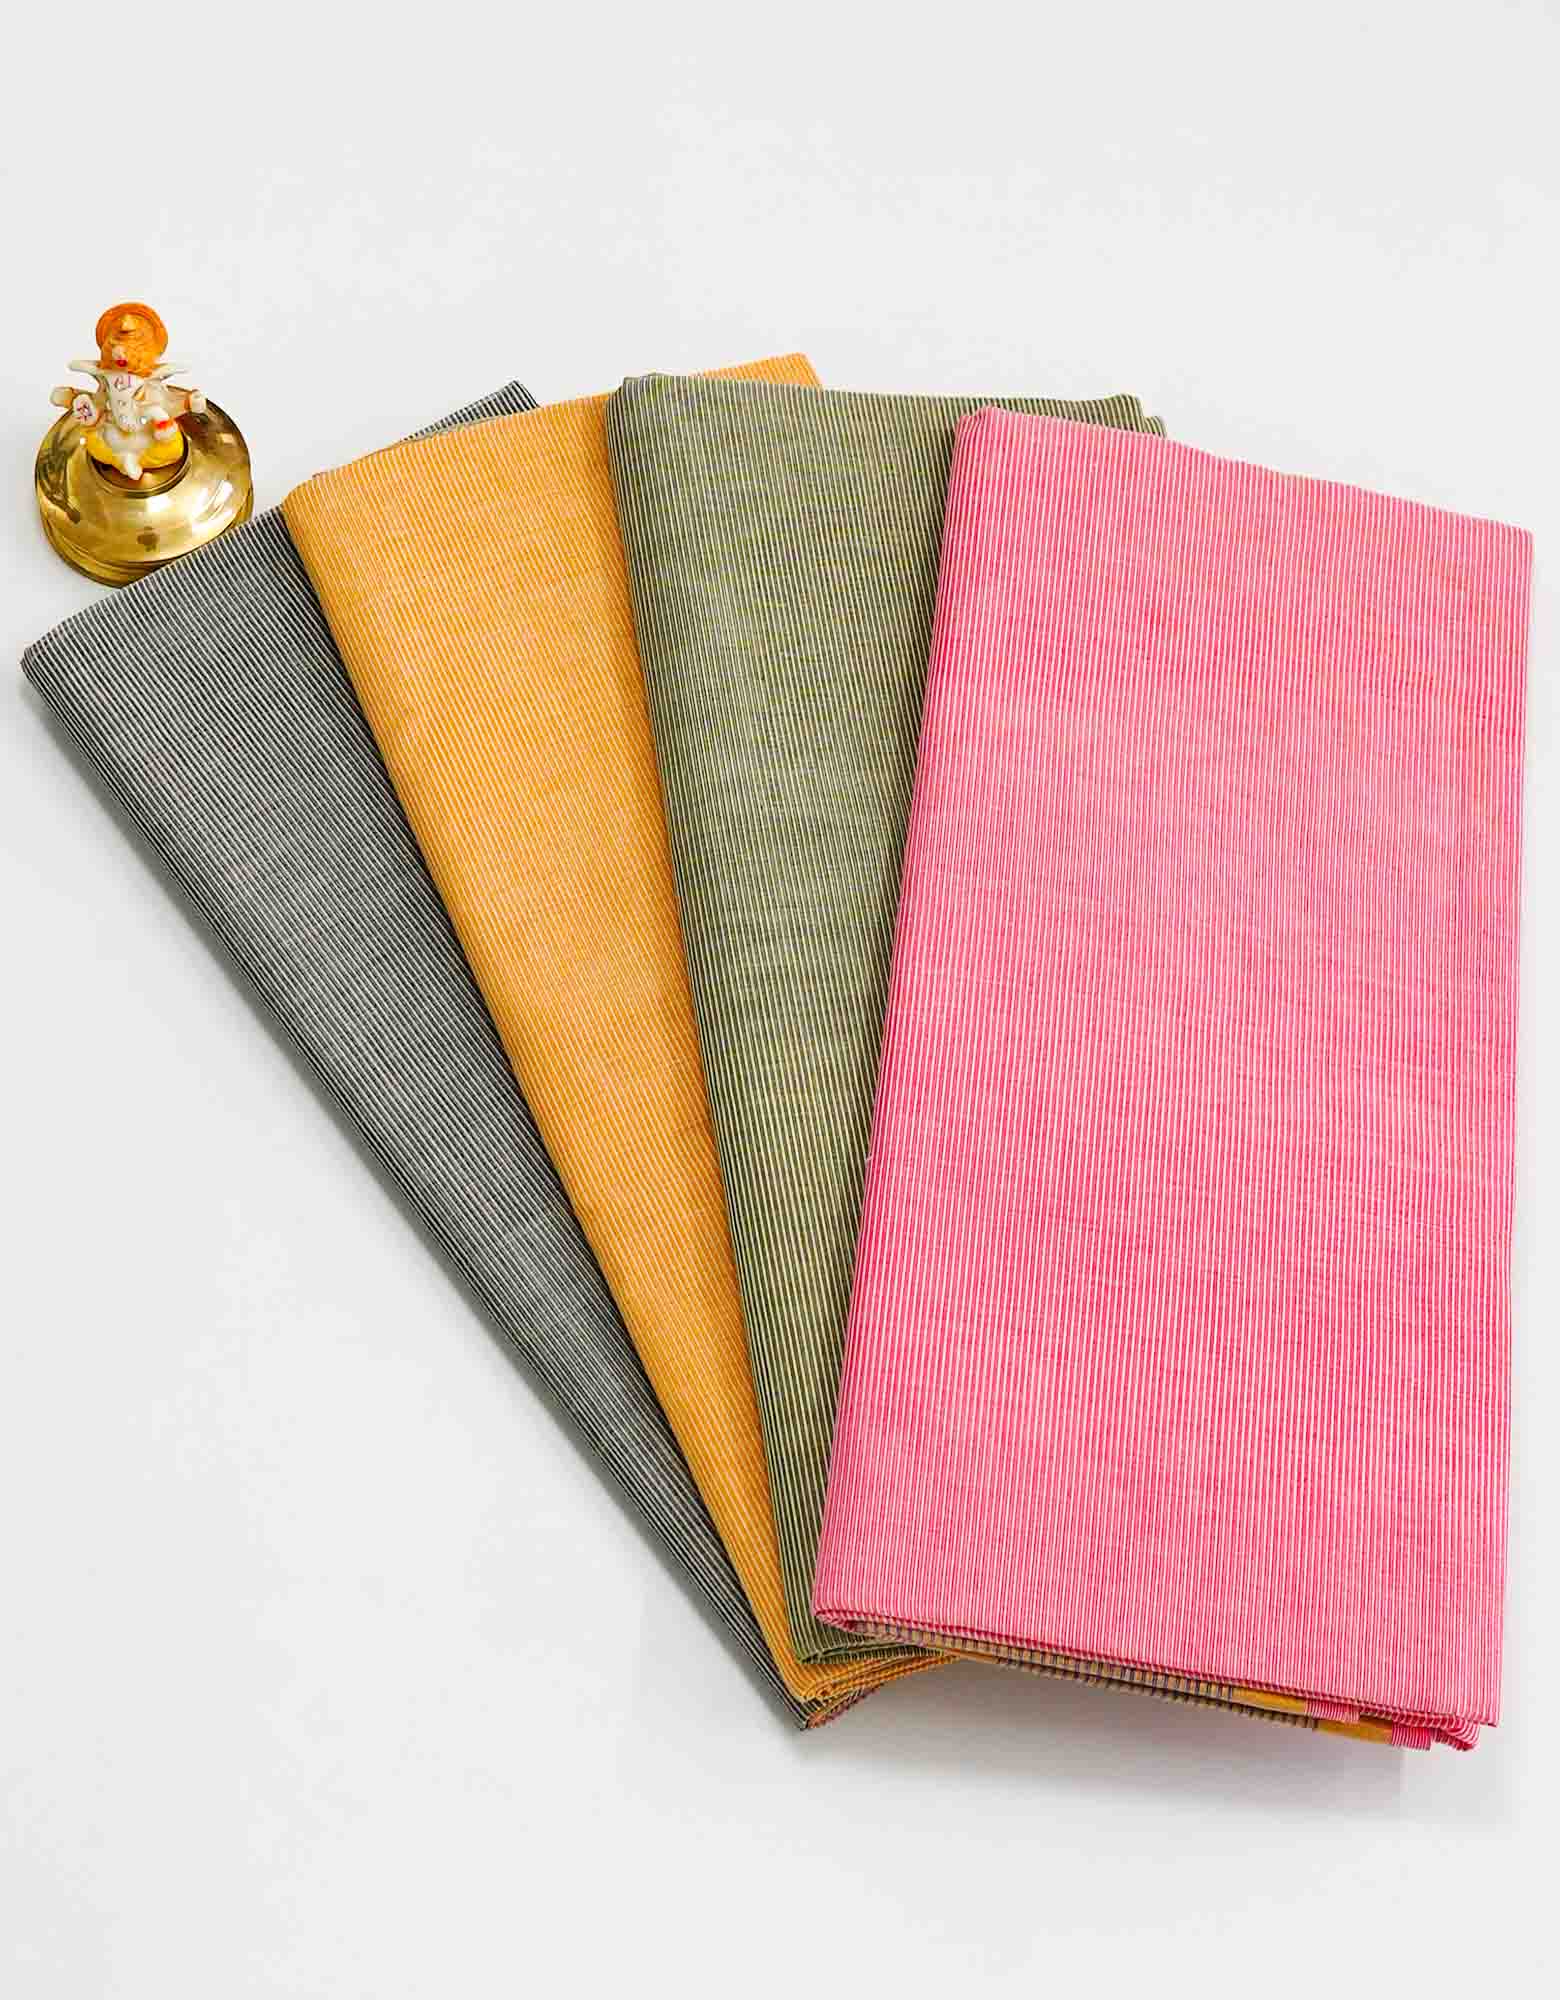 Tissue cotton sarees with four different colors